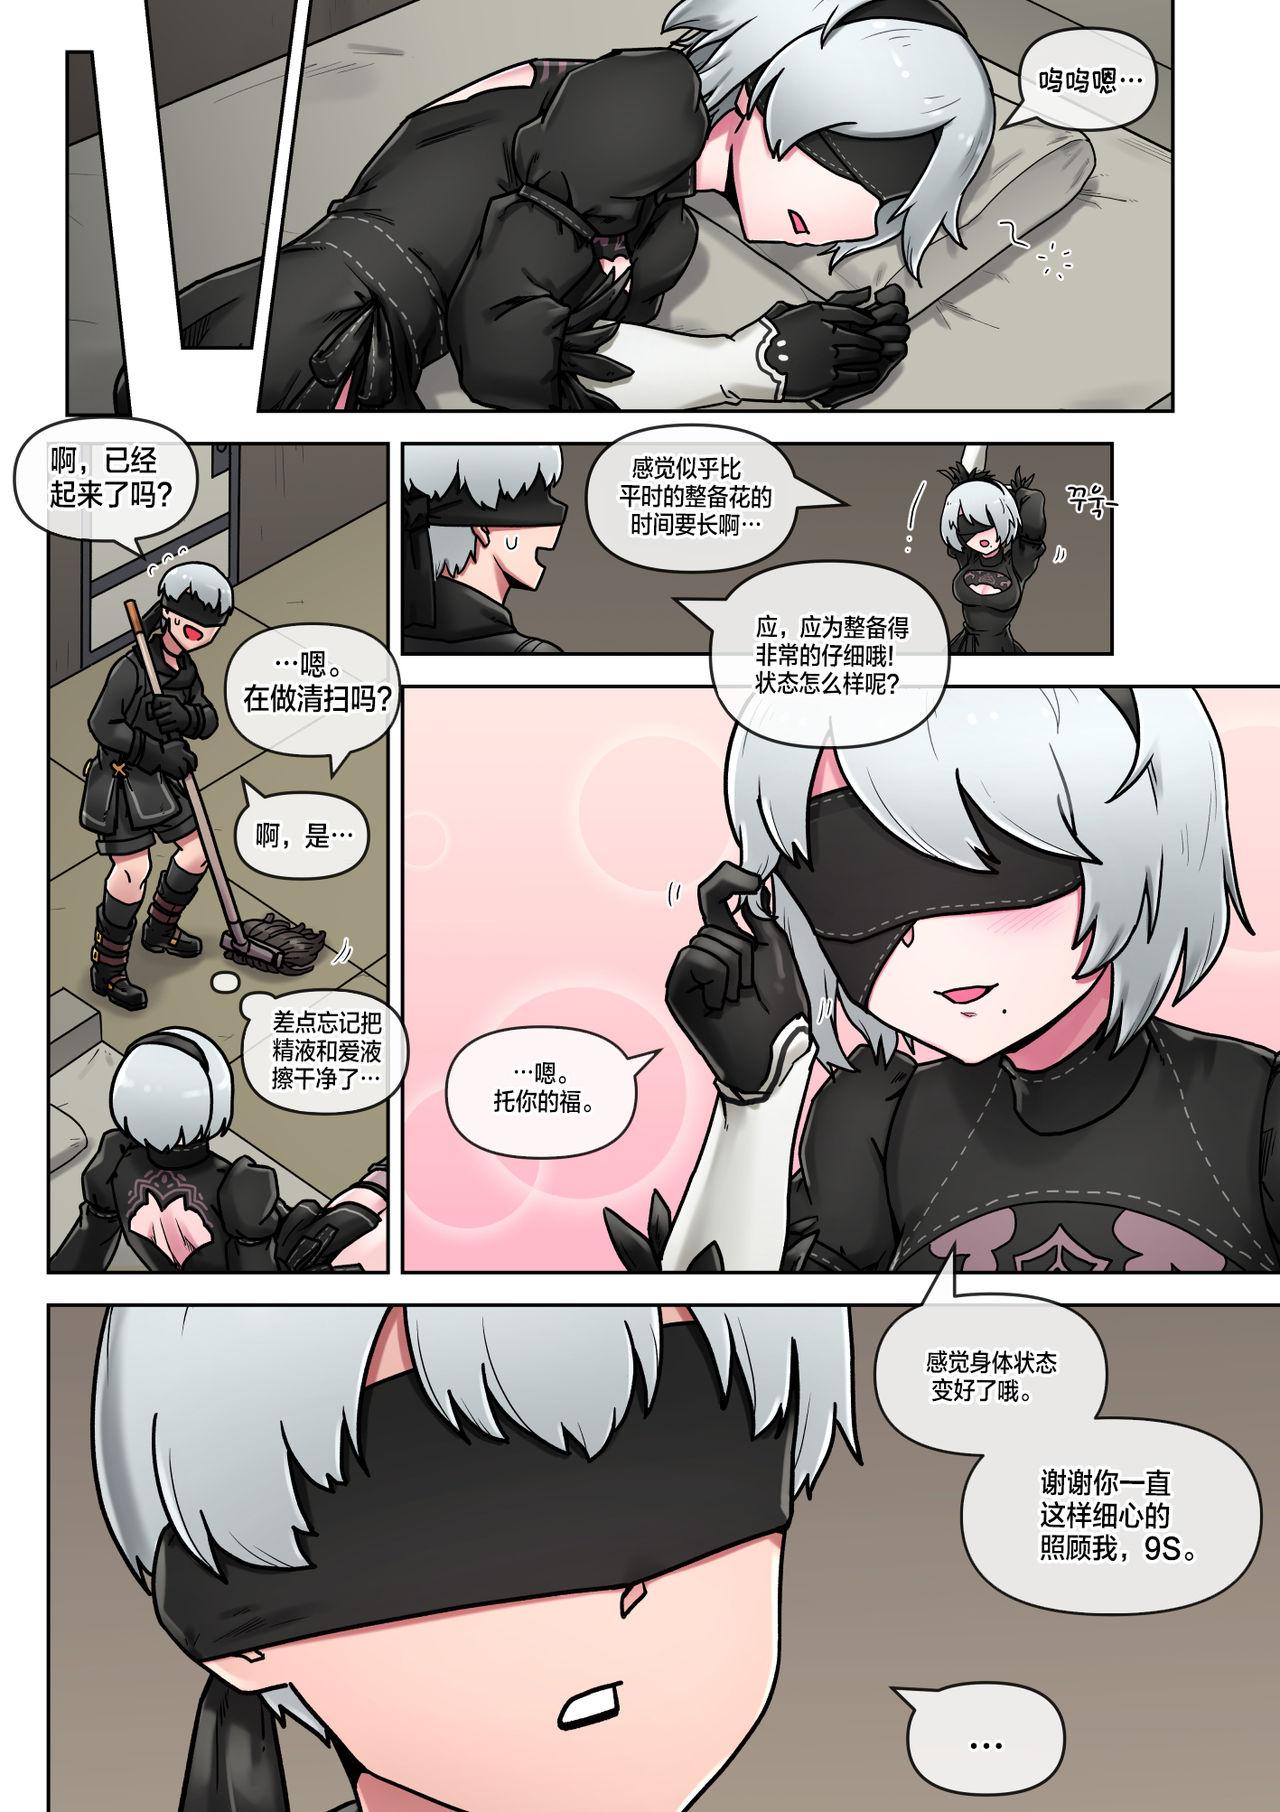 Time for maintenance, 2B 23